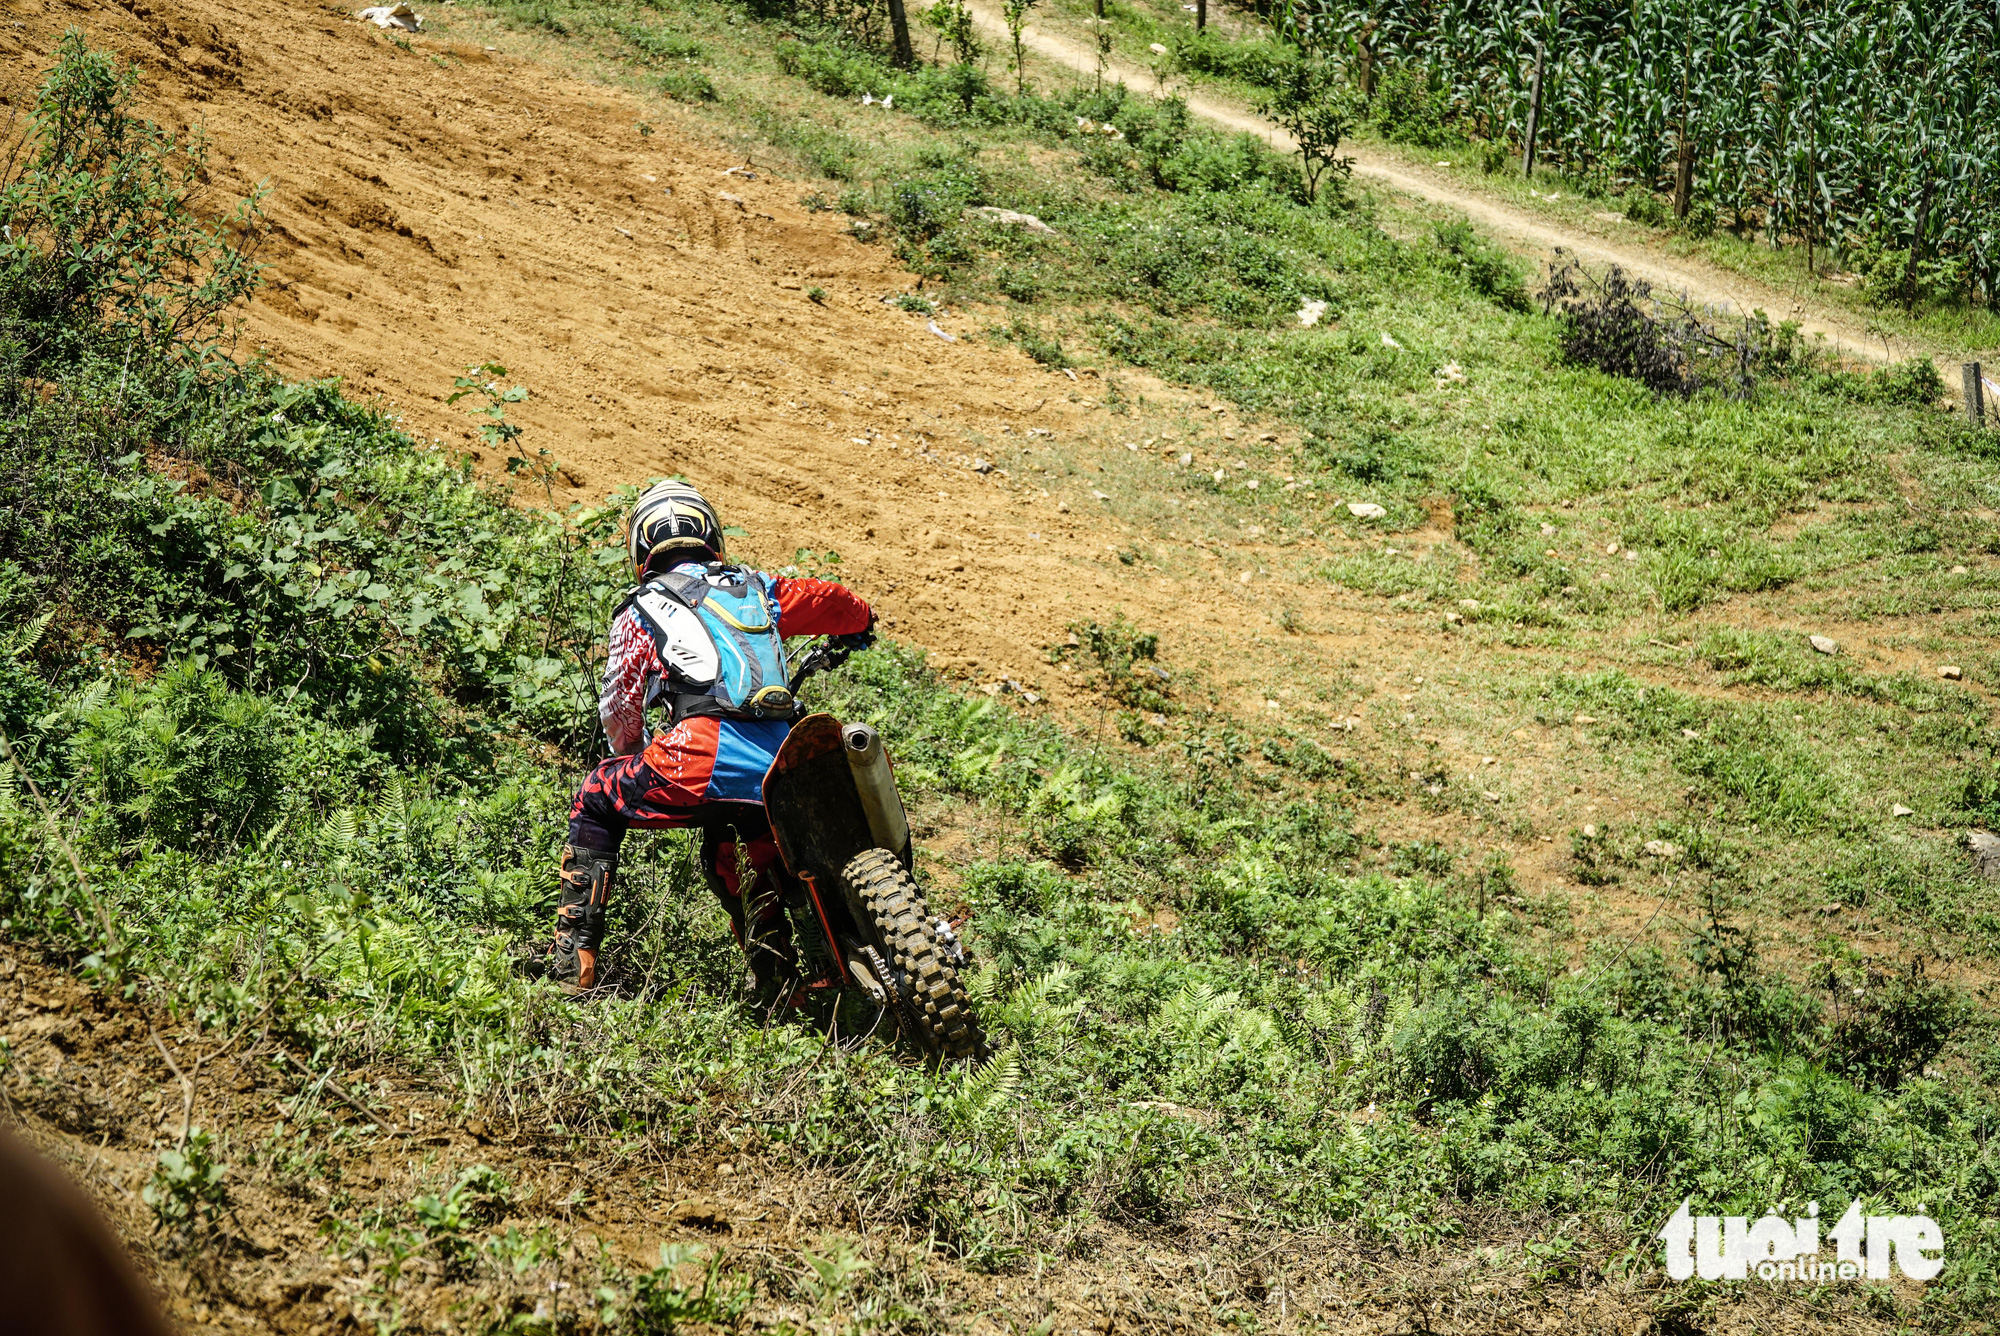 An unfortunate racer loses his momentum while ascending uphill in the final race of the 2023 VTV Cab - Off-road motorcycle racing tournament in Van Ho District, Son La Province, Vietnam, May 28, 2023. Photo: Nguyen Hien / Tuoi Tre